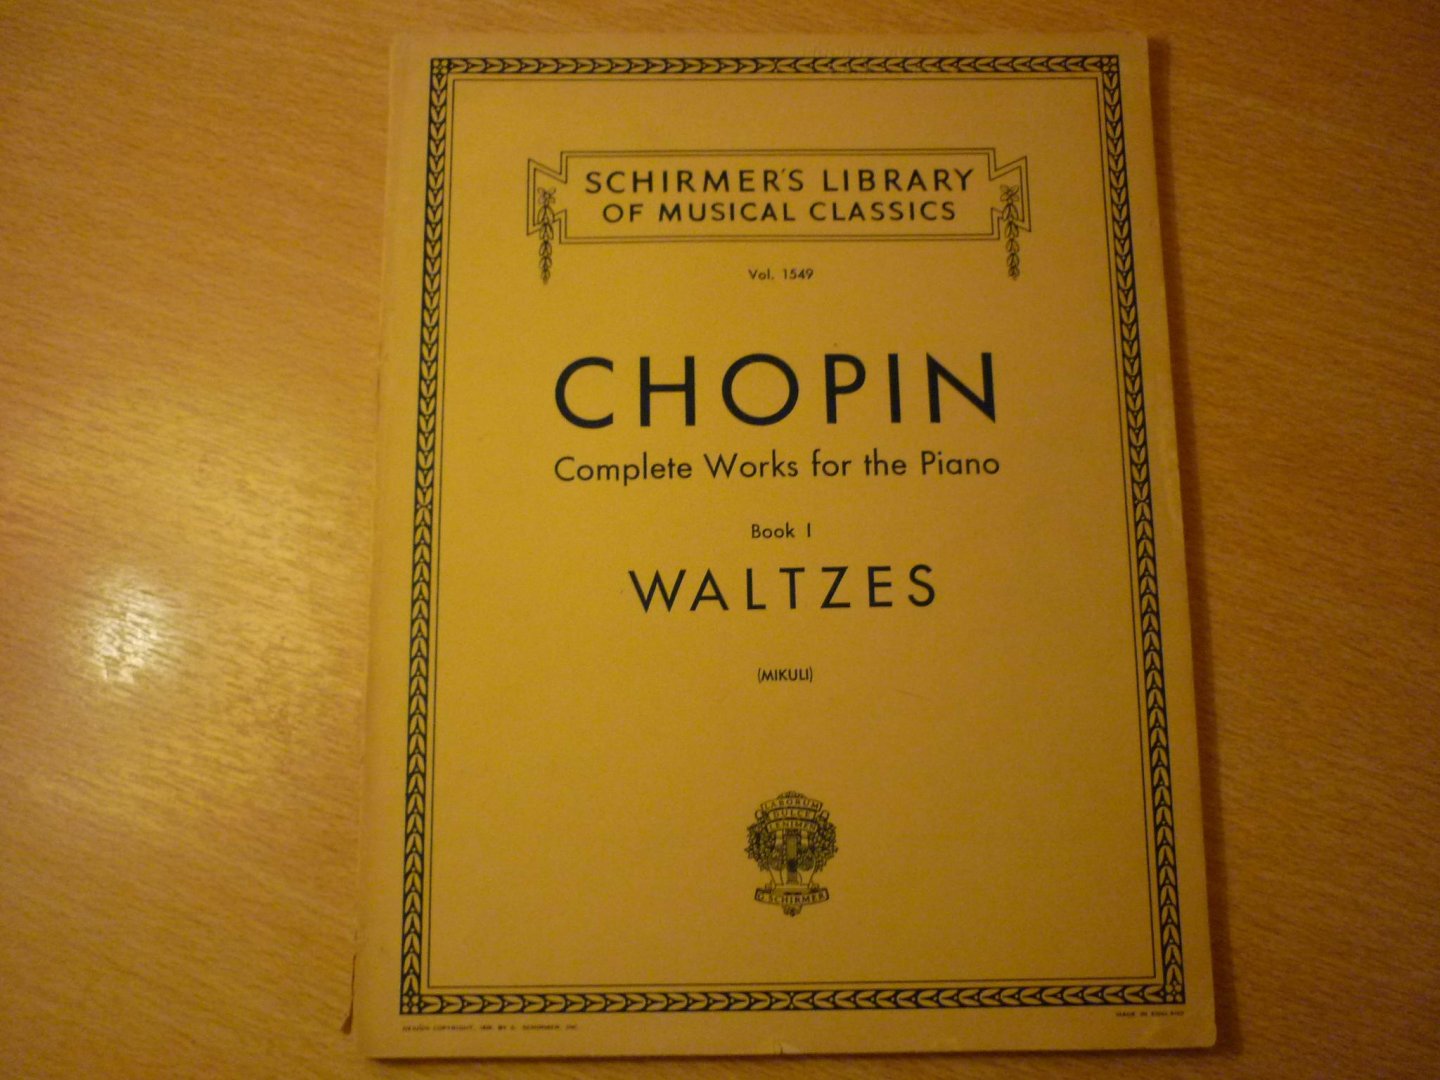 Chopin; Frederic - Complete Works for the Piano - Book I - Waltzes (Edited and fingered by Carl Mikuli. Historical and analytical comments by James Huneker. Schirmer Library Of Msc Clssc)